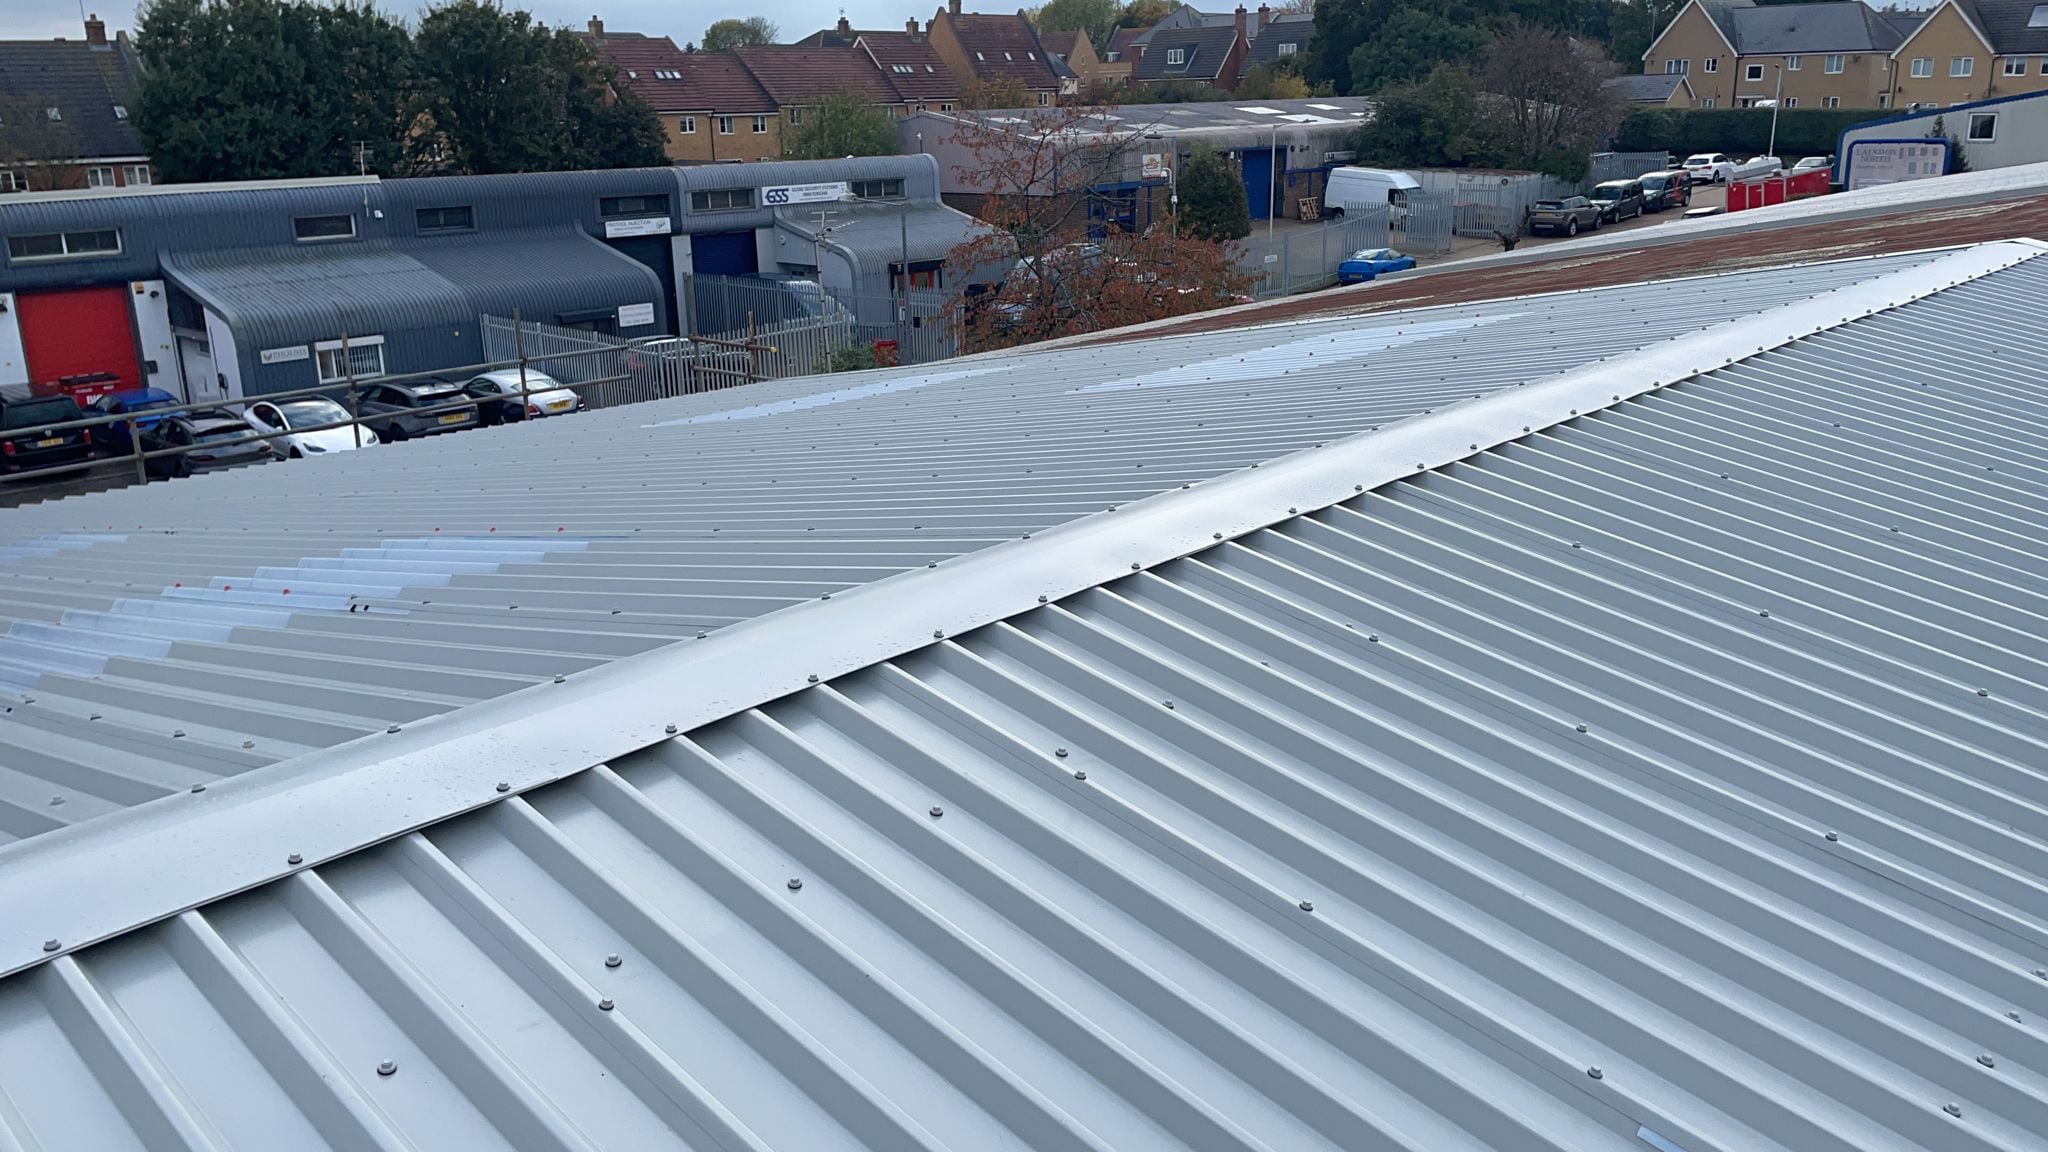 Over-roofing to an office and warehouse roof in Laindon Essex